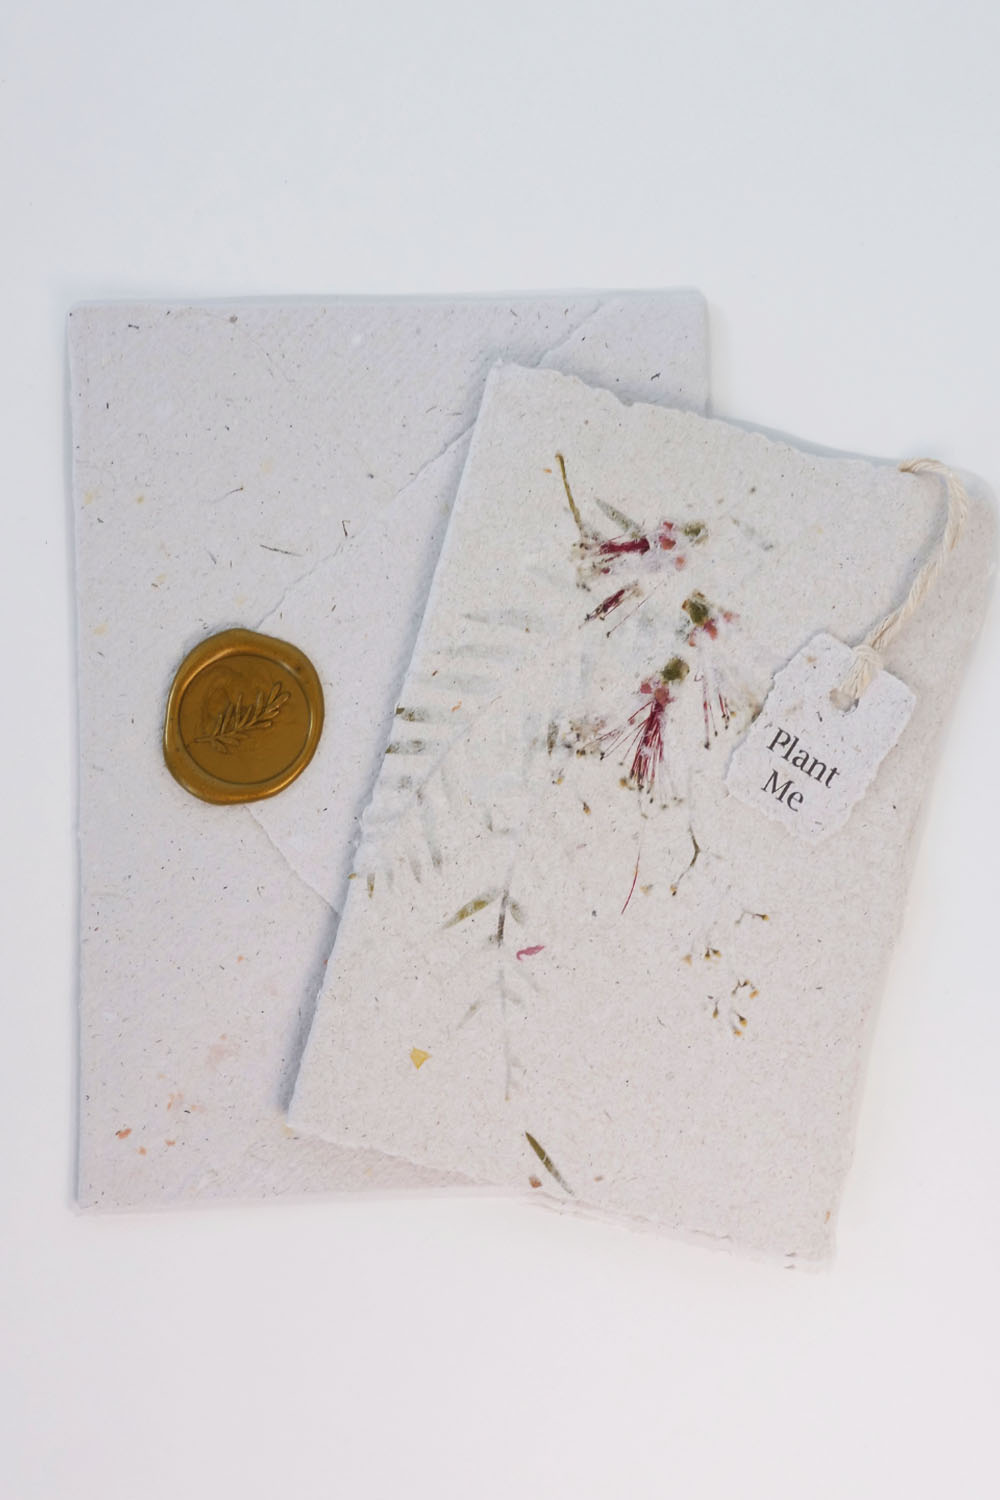 Handmade paper card with petal and leaf design Seed-embedded.  Matching envelope with wax seal. Cards can be planted in the ground. Environmentally friendly and made in Australia.